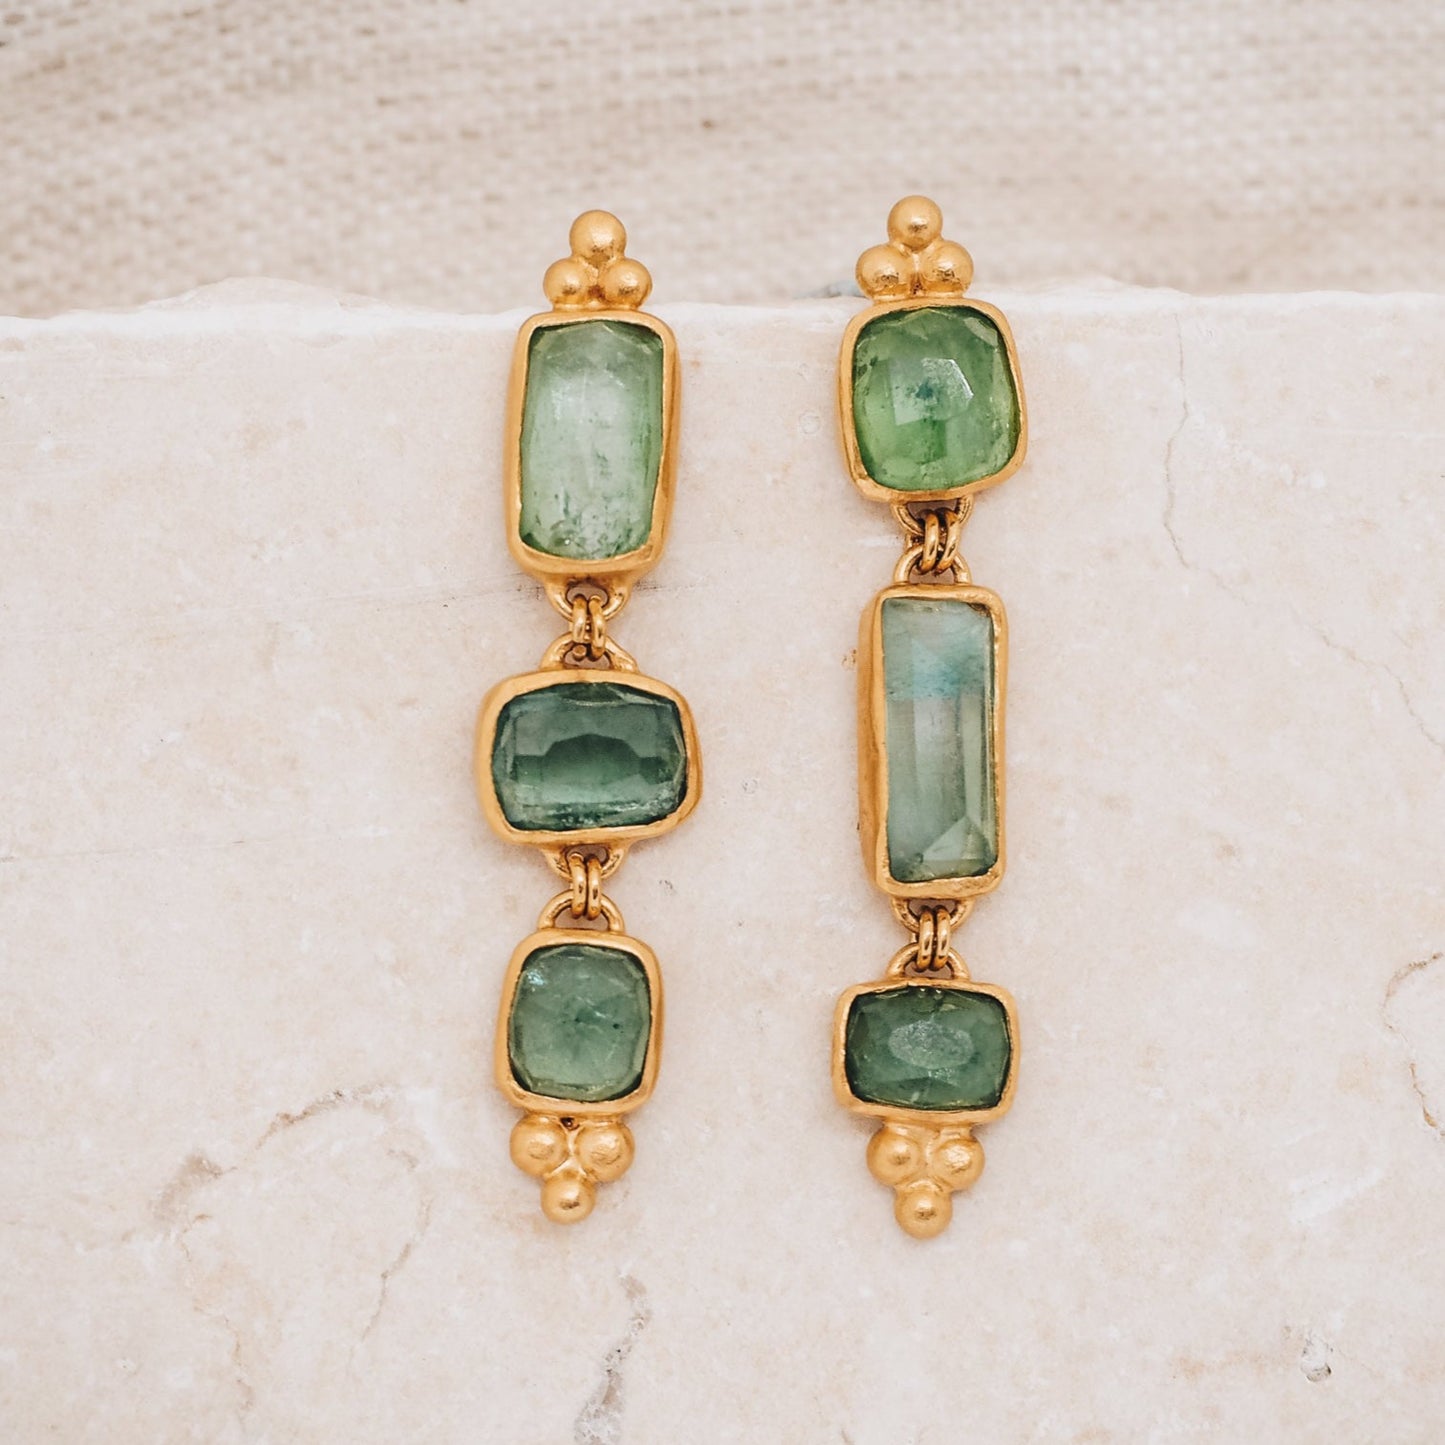 earrings showcasing rich gold color with hints of blue and green, reminiscent of the serene hues of the ocean. The earrings feature organic gemstones in varying shades of blue and green, with square and rectangular rose-cut tourmalines adding a unique touch.